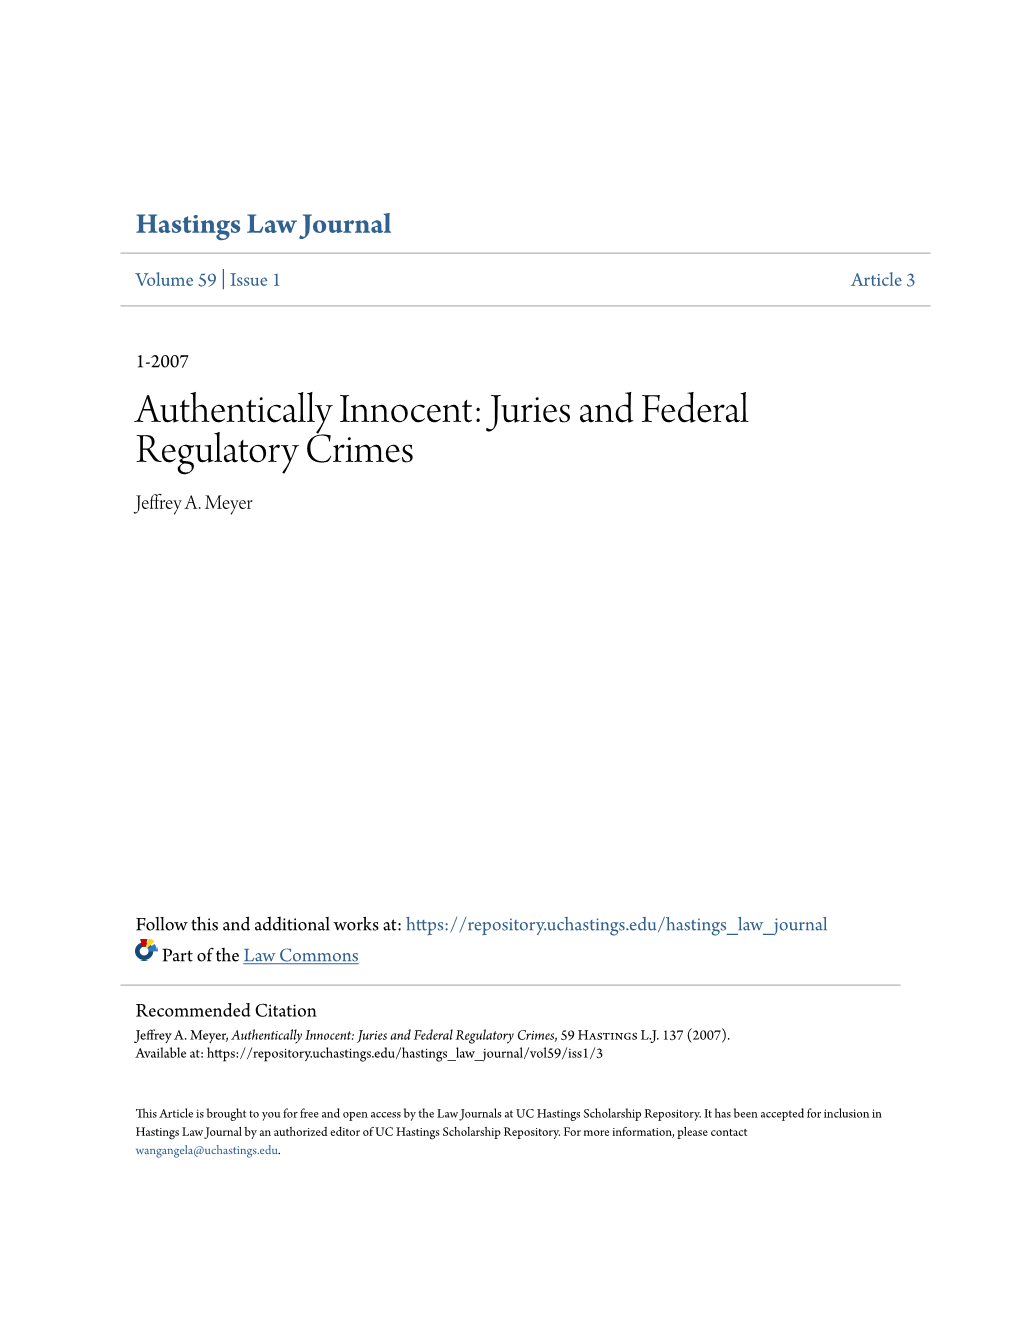 Authentically Innocent: Juries and Federal Regulatory Crimes Jeffrey A